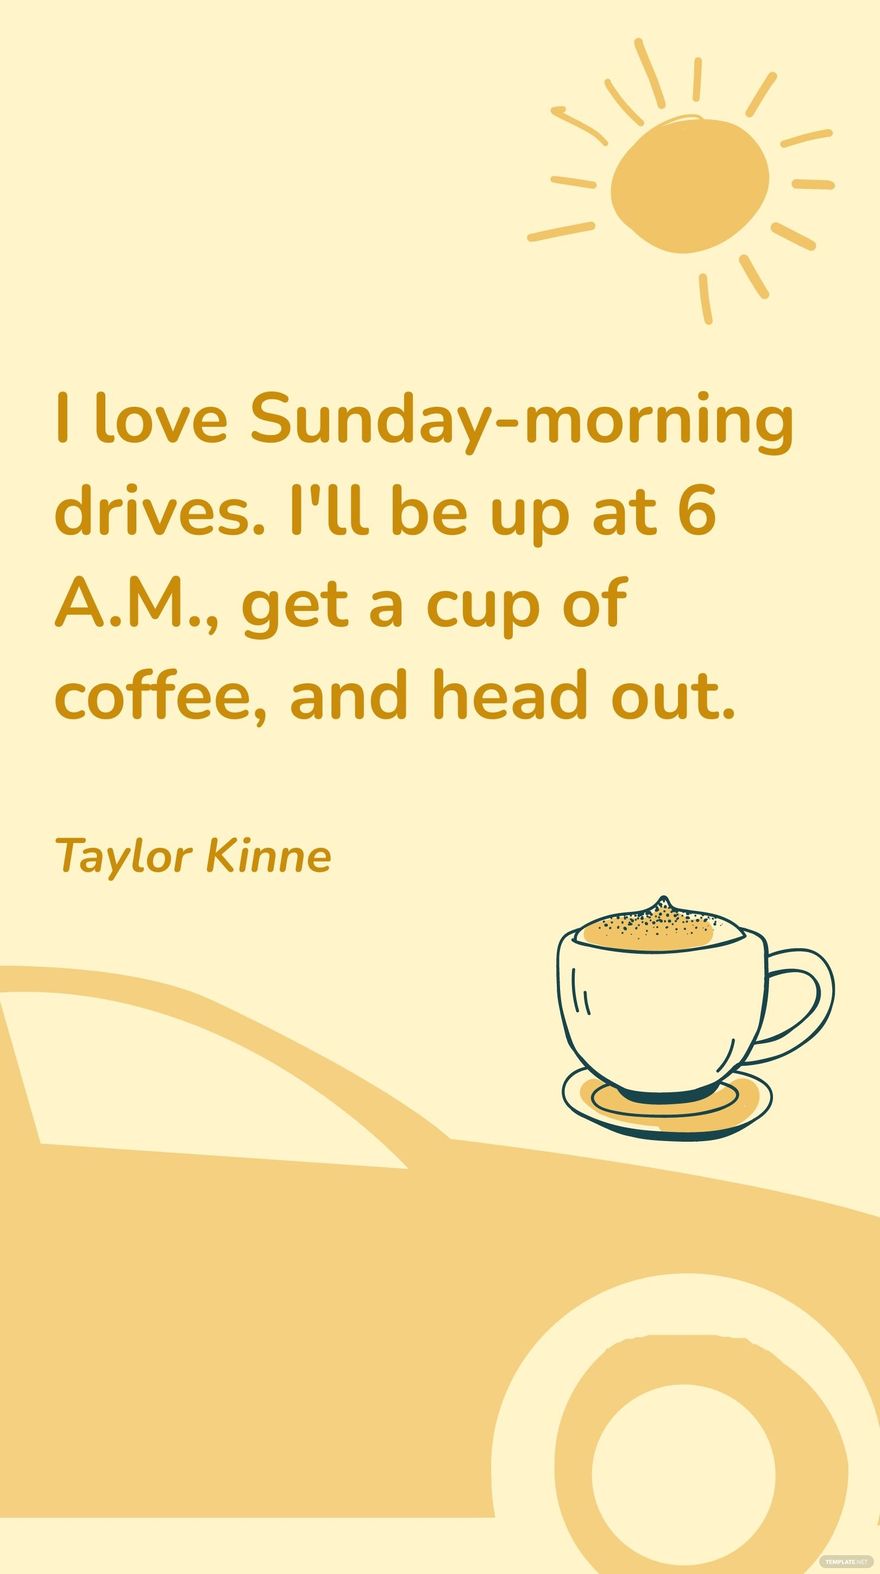 Taylor Kinne - I love Sunday-morning drives. I'll be up at 6 A.M., get a cup of coffee, and head out.